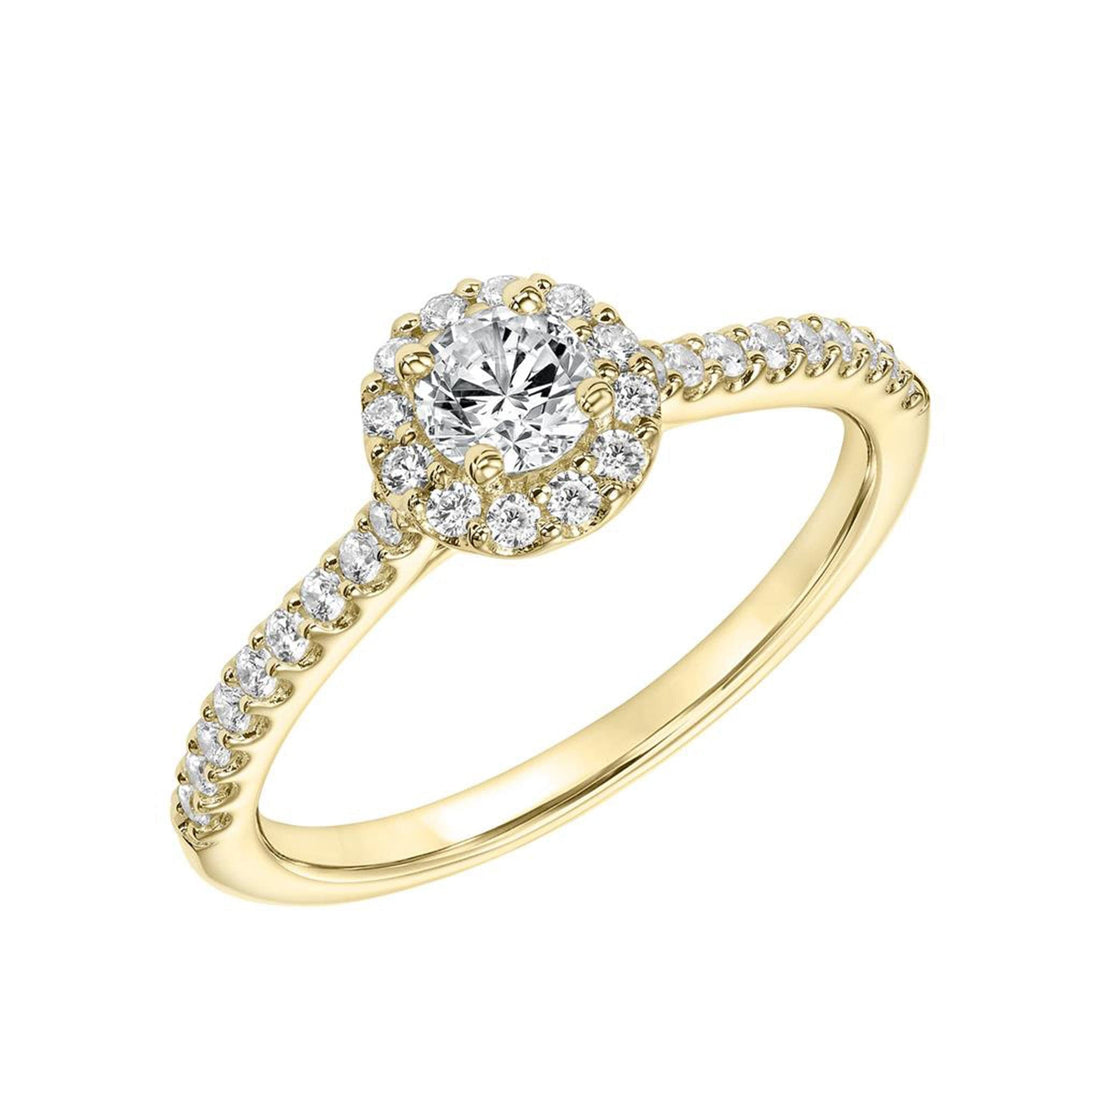 Round Brilliant Diamond Halo Engagement Ring in Yellow Gold Angle